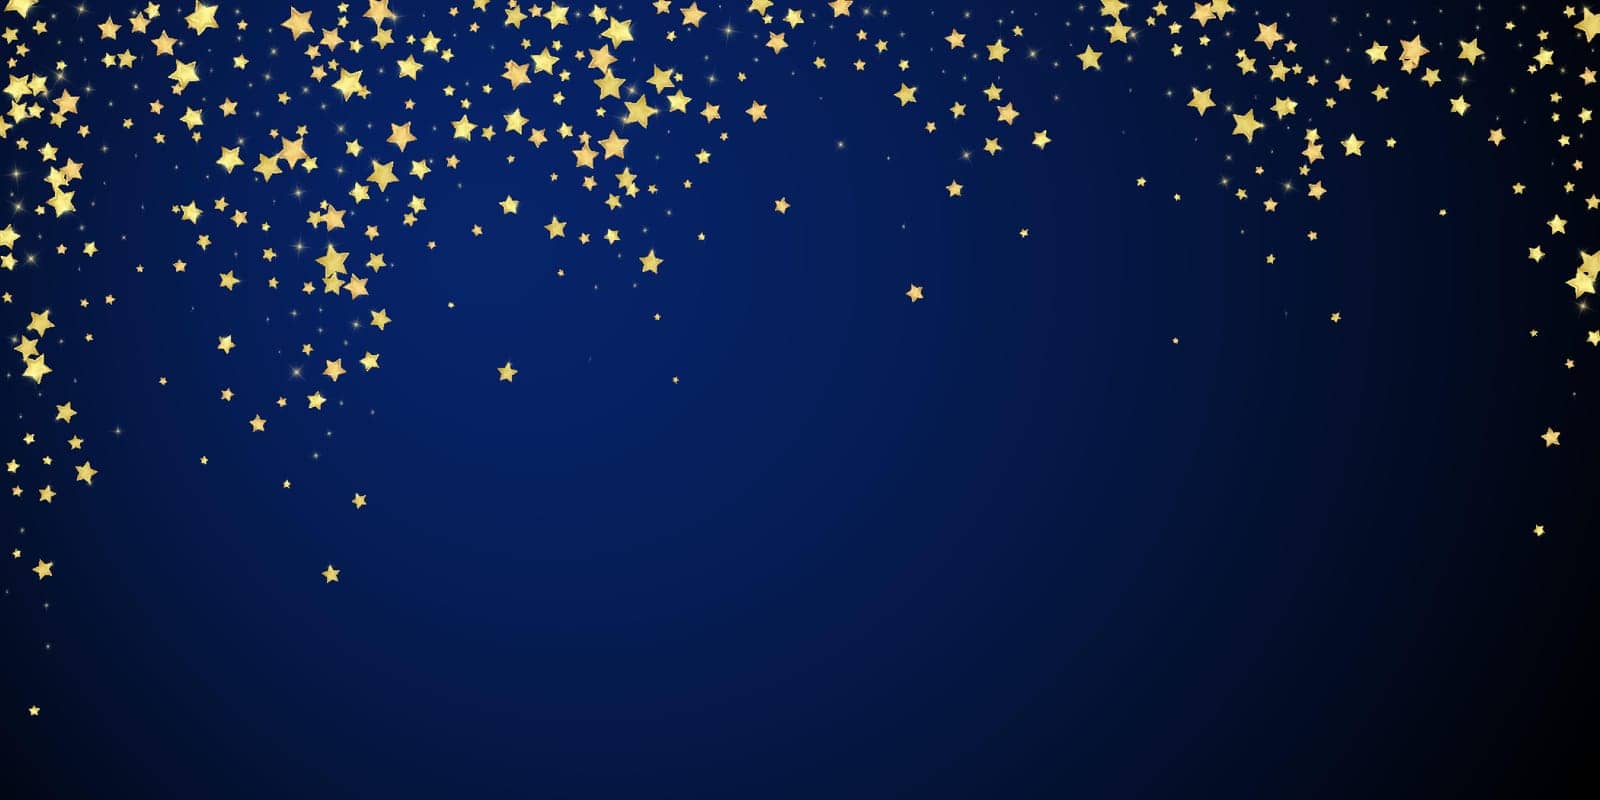 Magic stars vector overlay. Gold stars scattered around randomly, falling down, floating. Chaotic dreamy childish overlay template. Magical cartoon night sky on dark blue background.